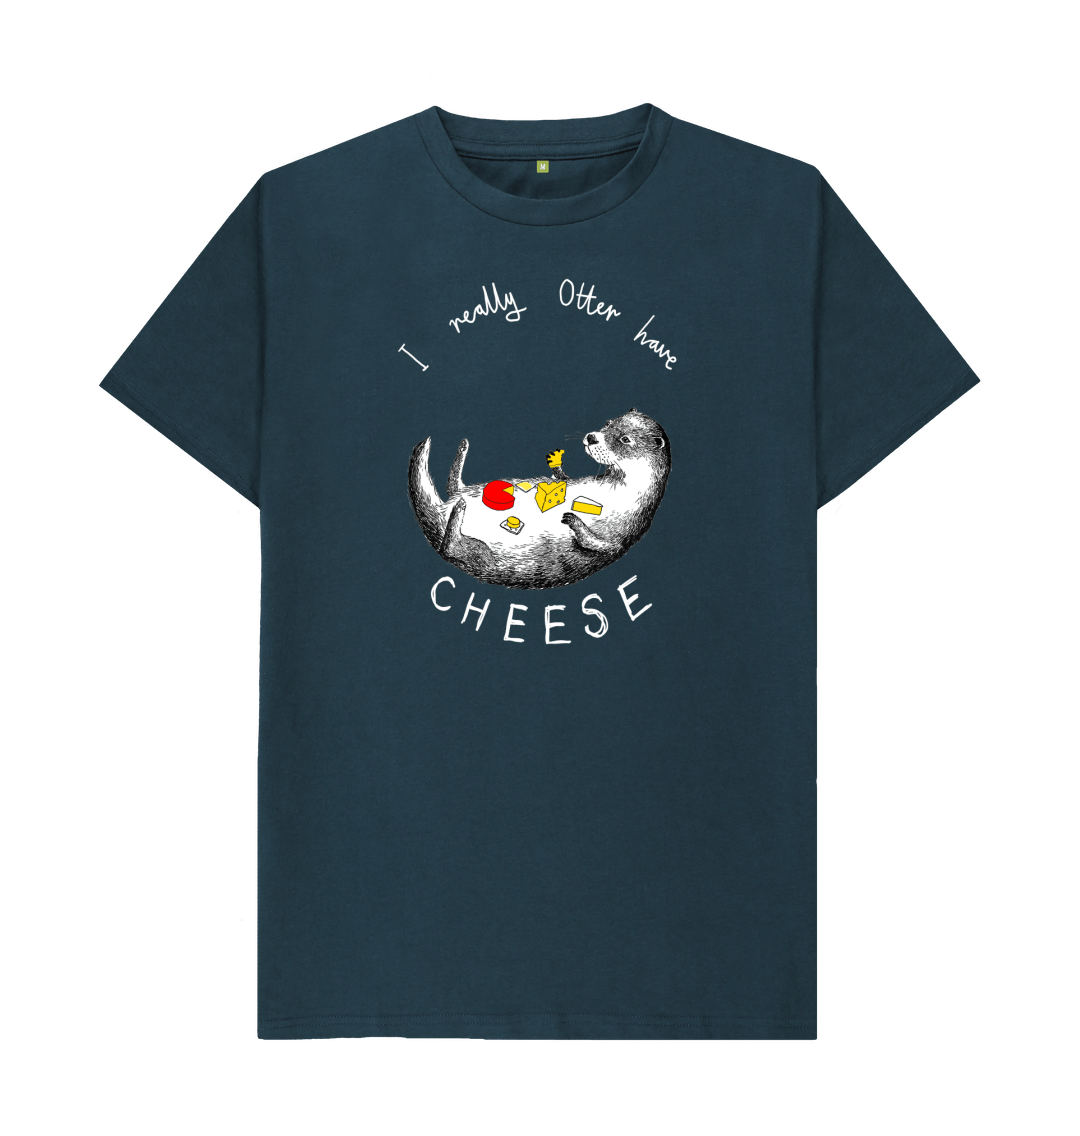 Denim Blue 'I Really Otter Have Cheese!' Men's T-shirt